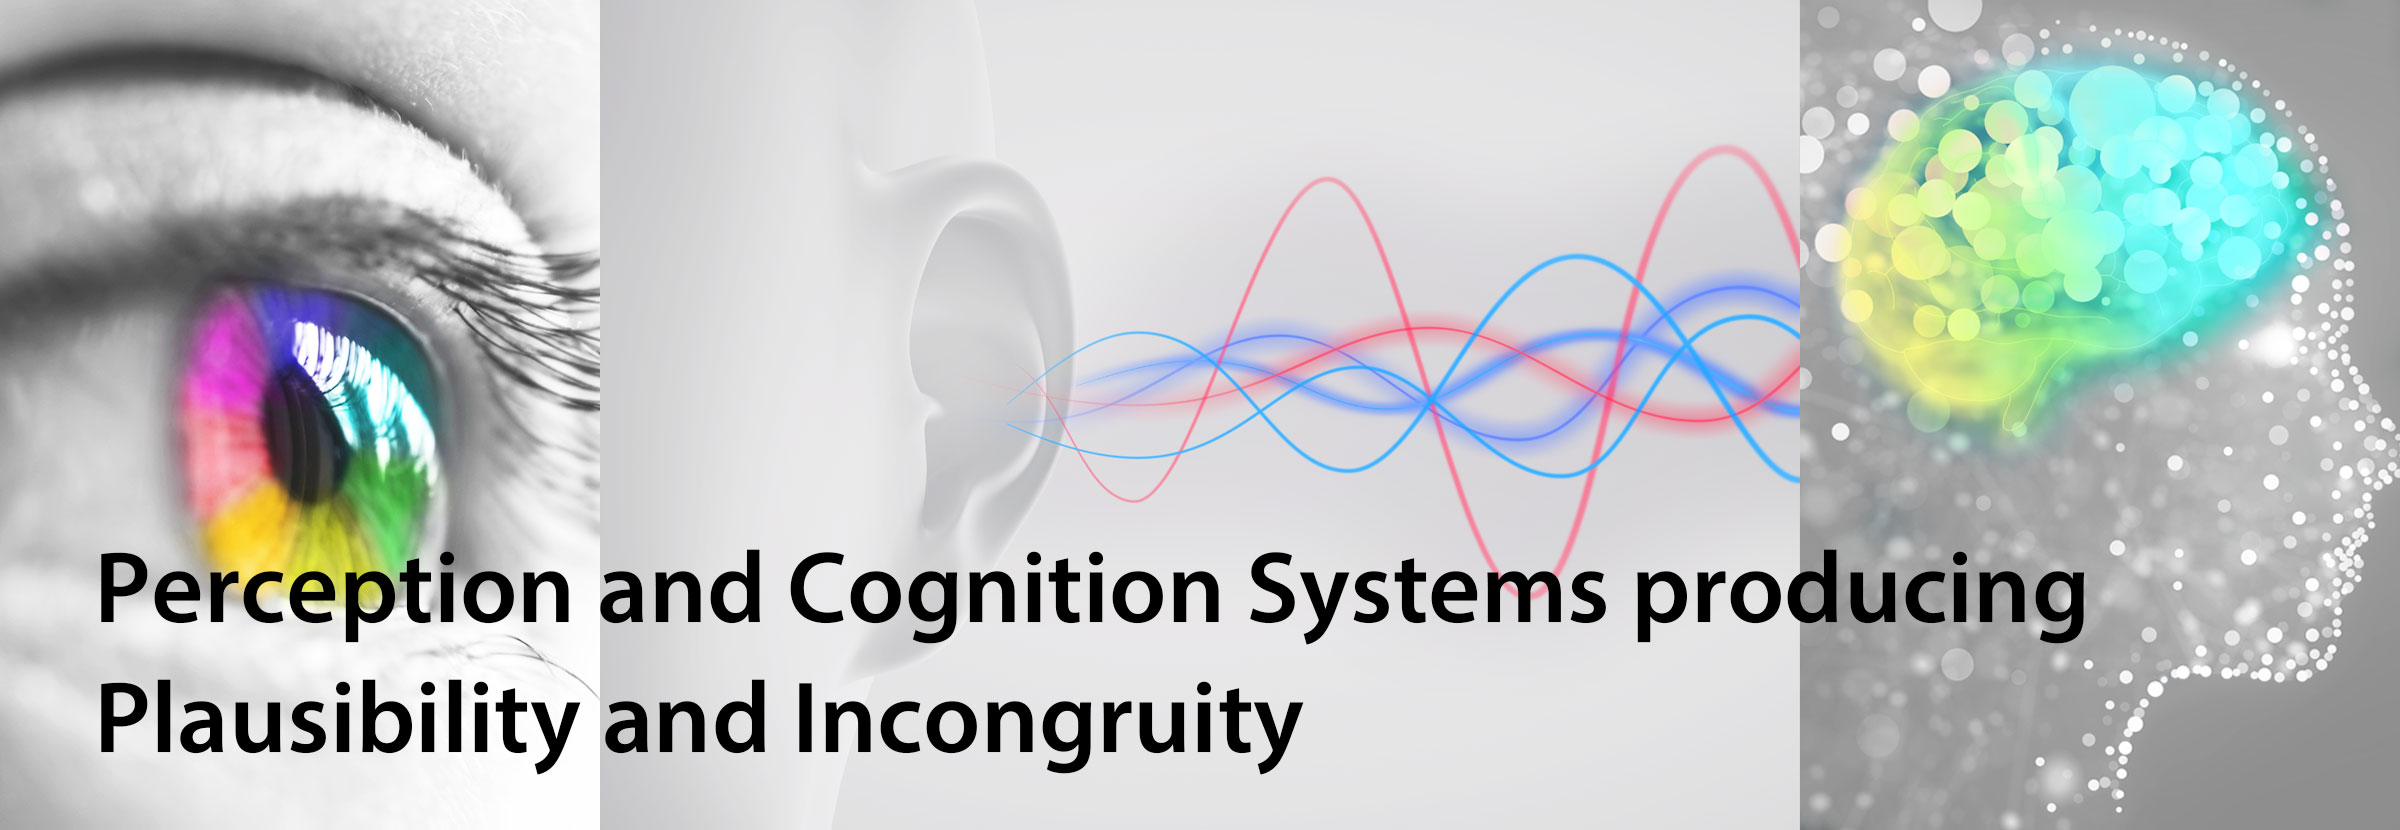 Perception and Cognition Systems producing Plausibility and Incongruity